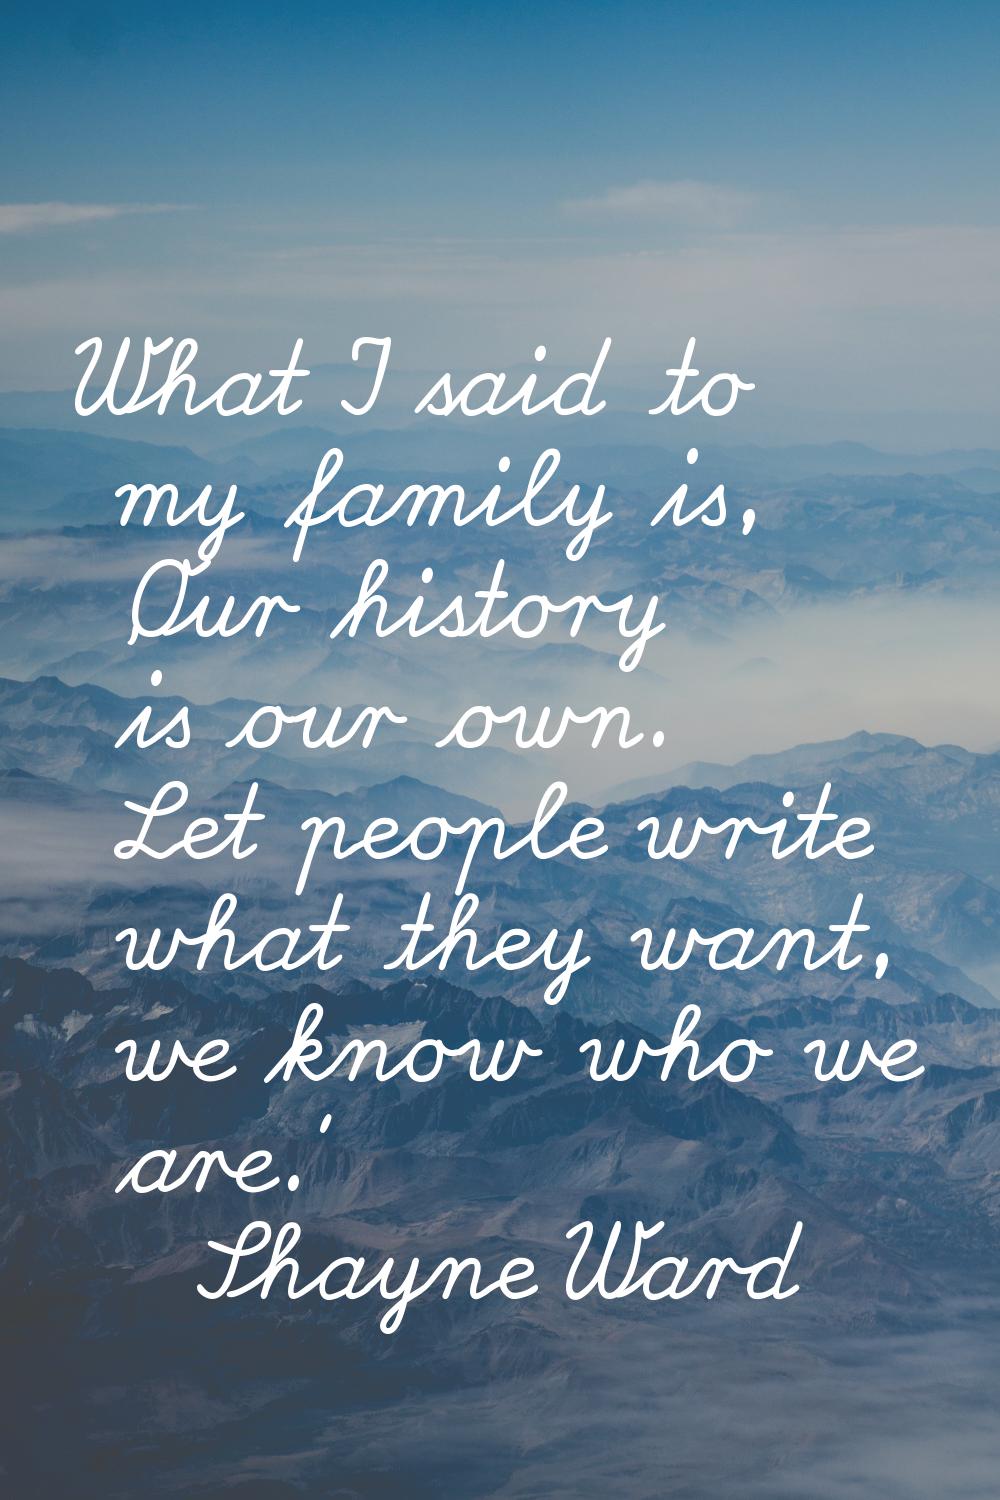 What I said to my family is, 'Our history is our own. Let people write what they want, we know who 